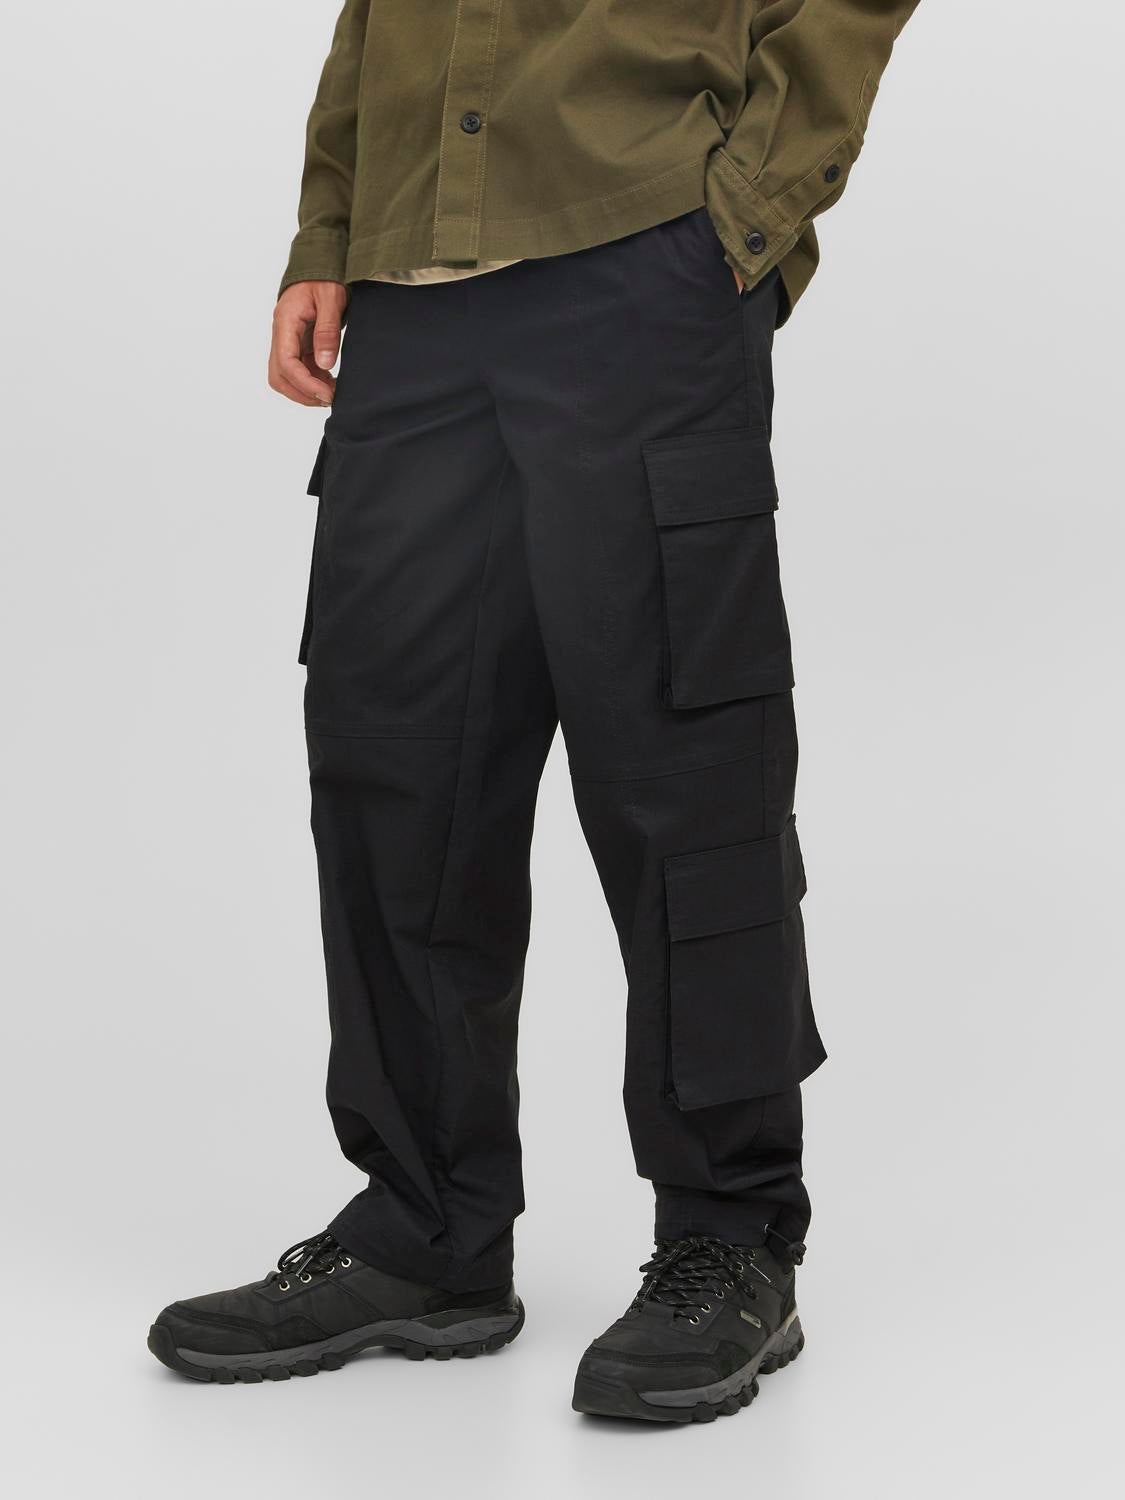 Summer Men's High Waist Pant Elastic Plus Size Clothing 6XL Cargo Pant Men Many  Pockets Loose Work Pants Male Straight Trousers